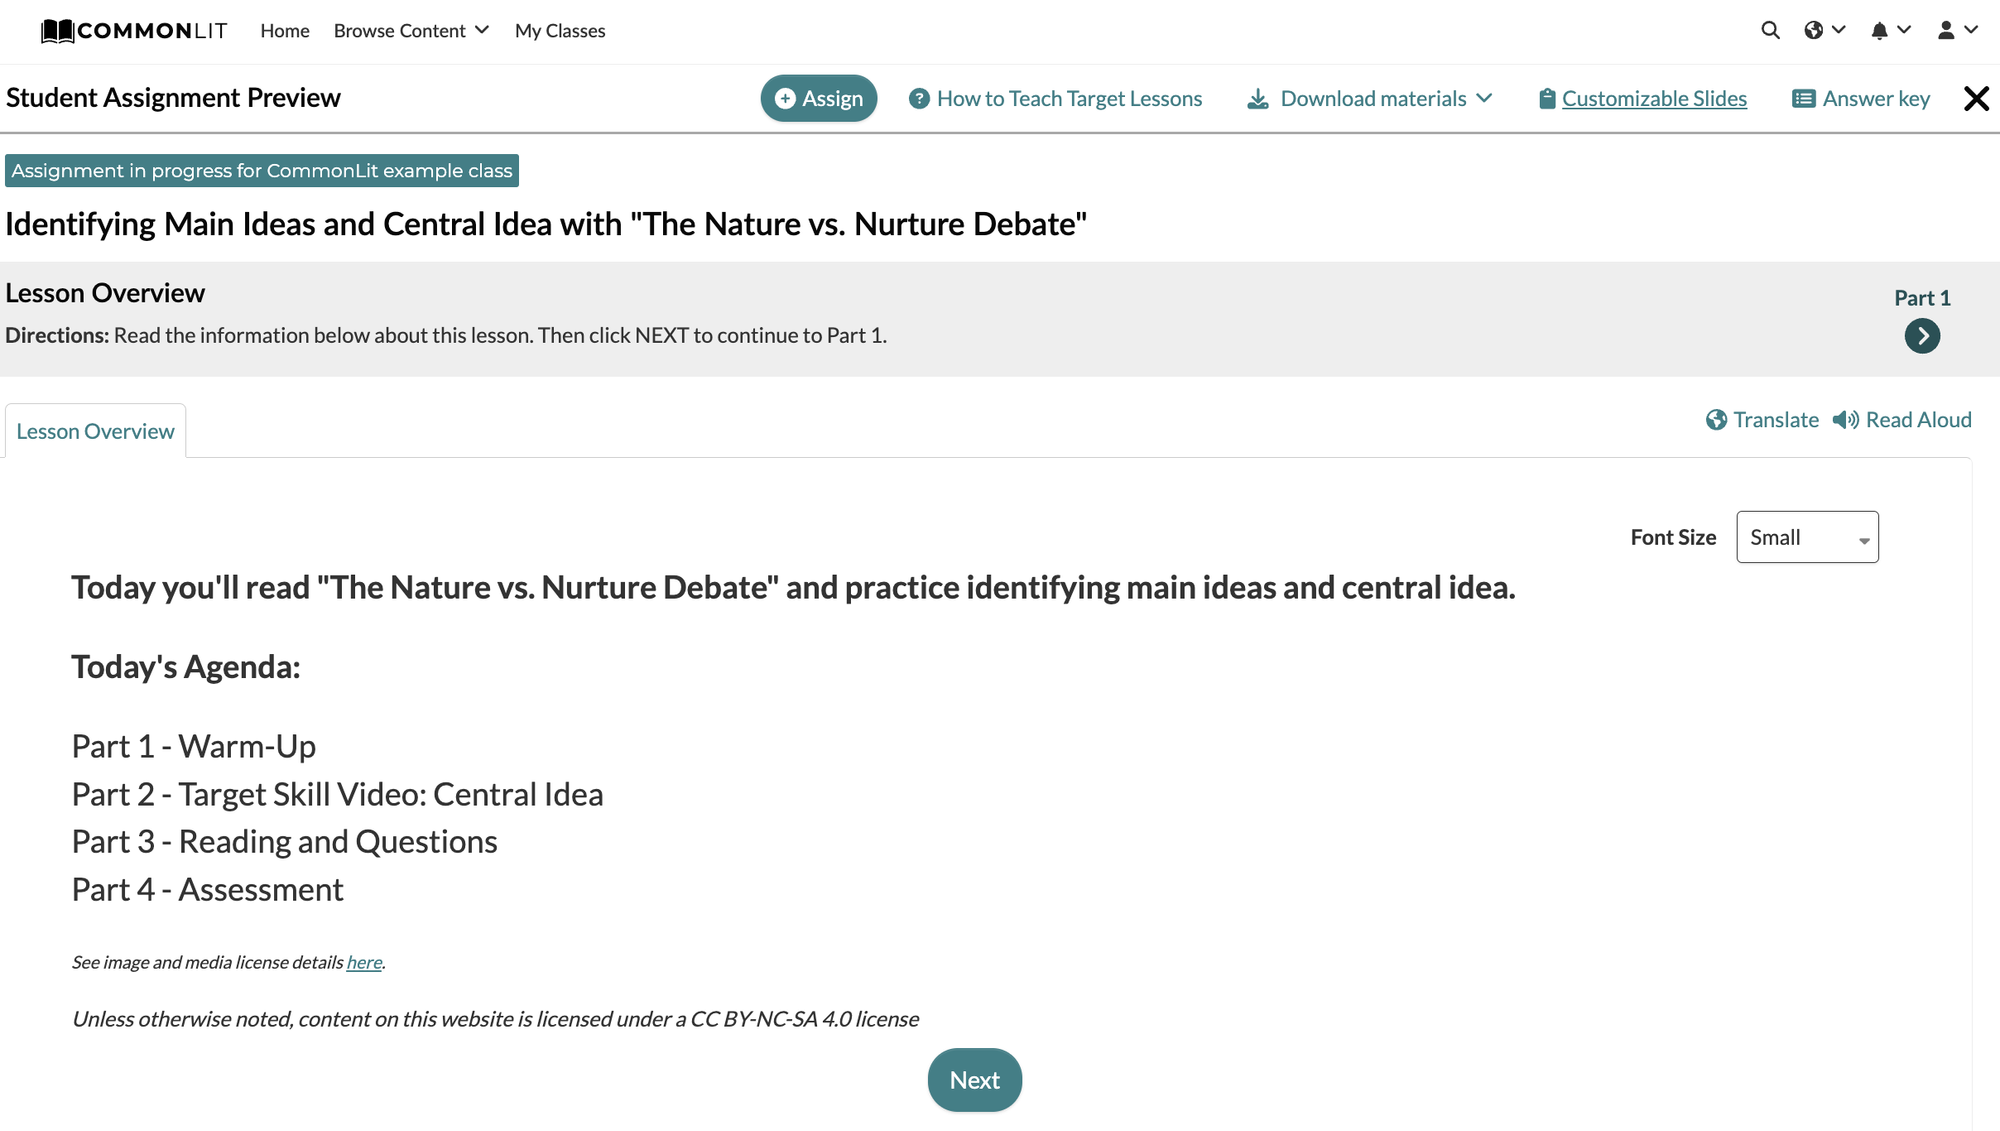 "Target" section for "The Nature vs. Nurture Debate" Target Lesson